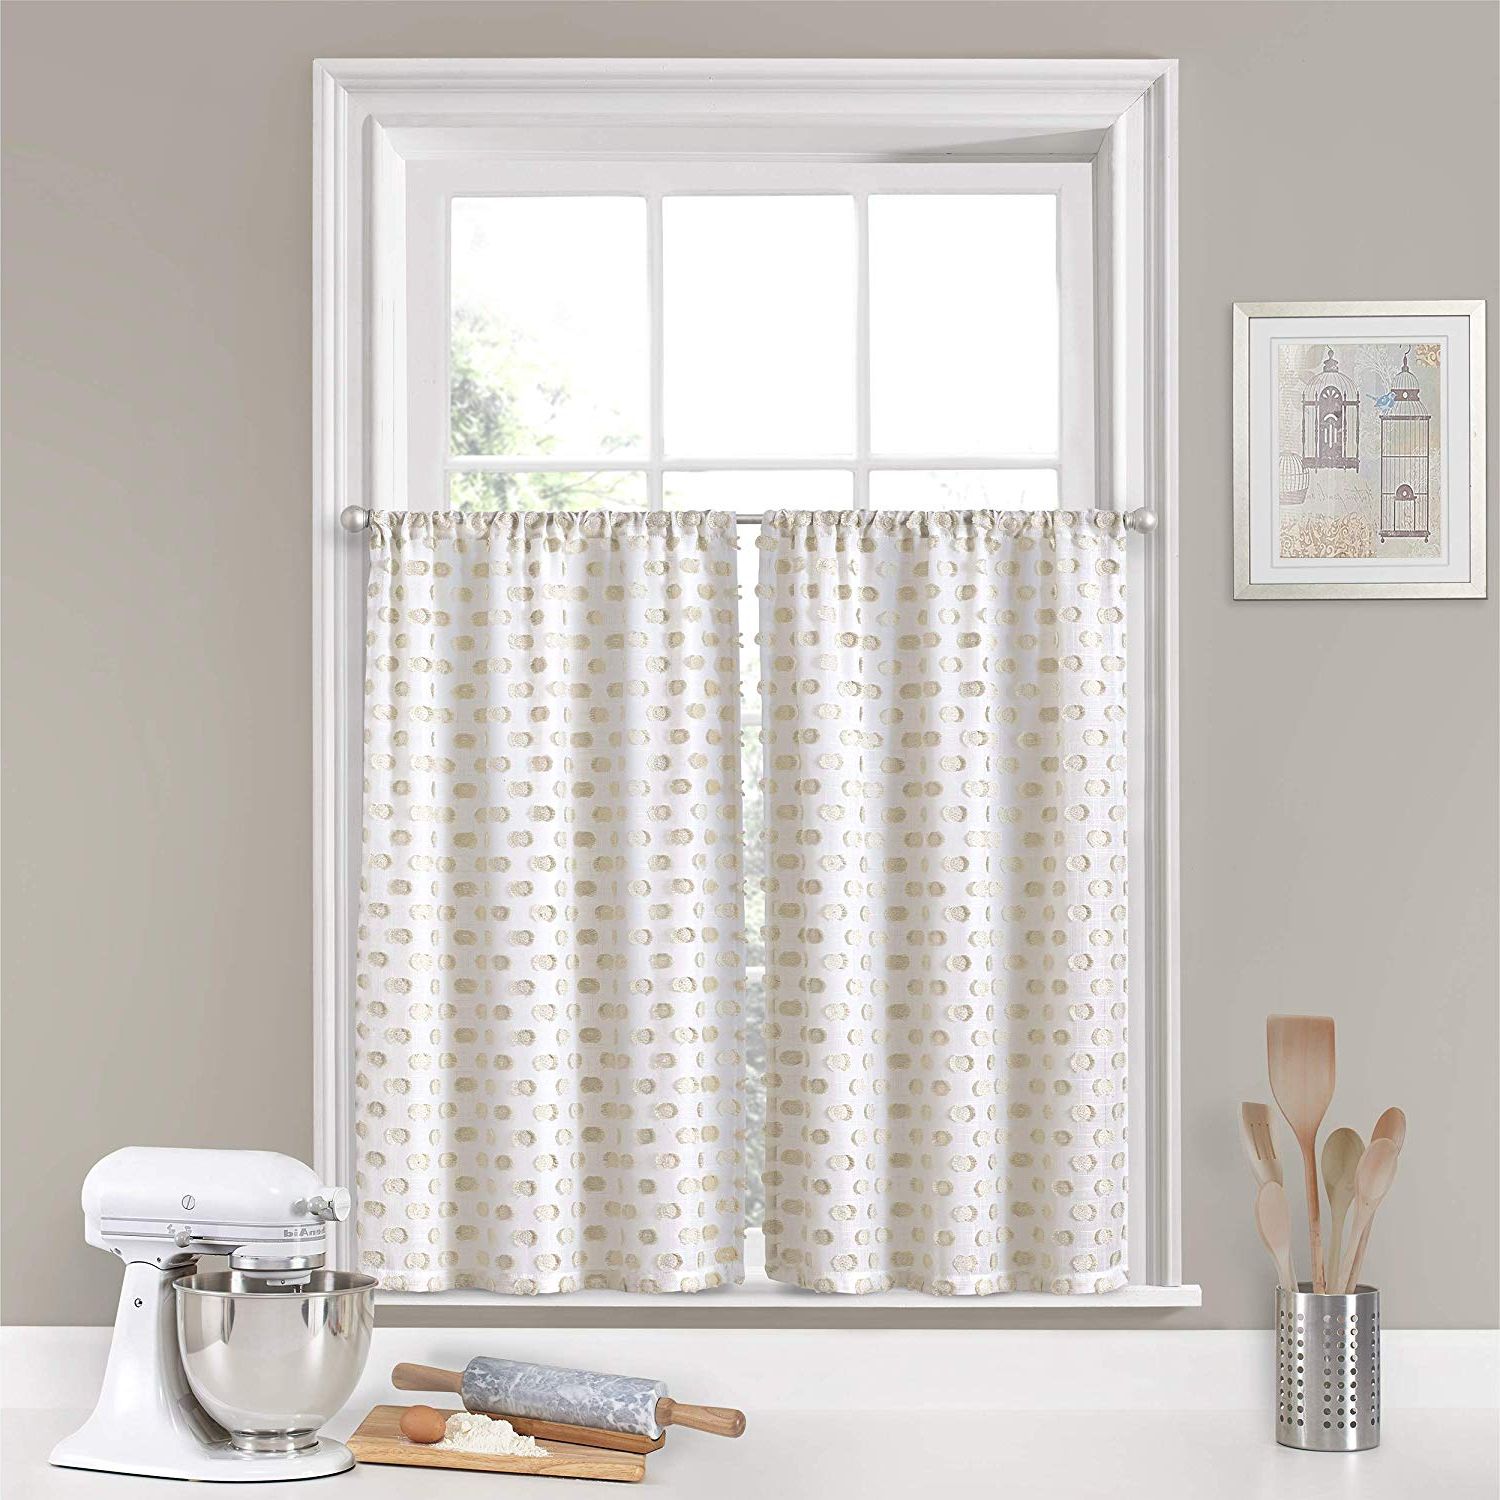 Waverly Kensington Bloom Window Tier Pairs Intended For Preferred Amazon: Vue Modo Small Panel Tiers Privacy Window (View 15 of 20)